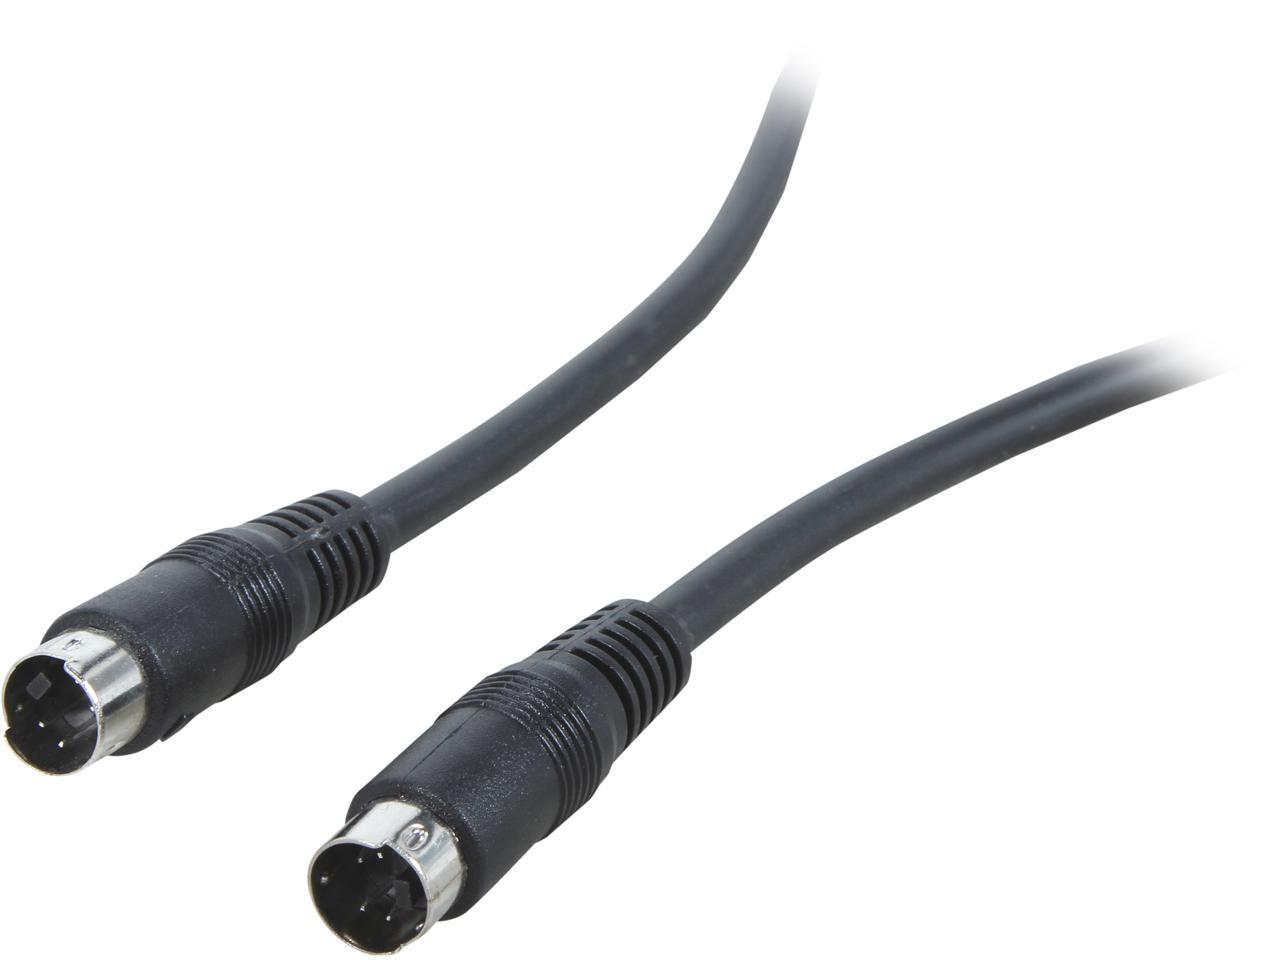 VH976 RCA S-Video Cable